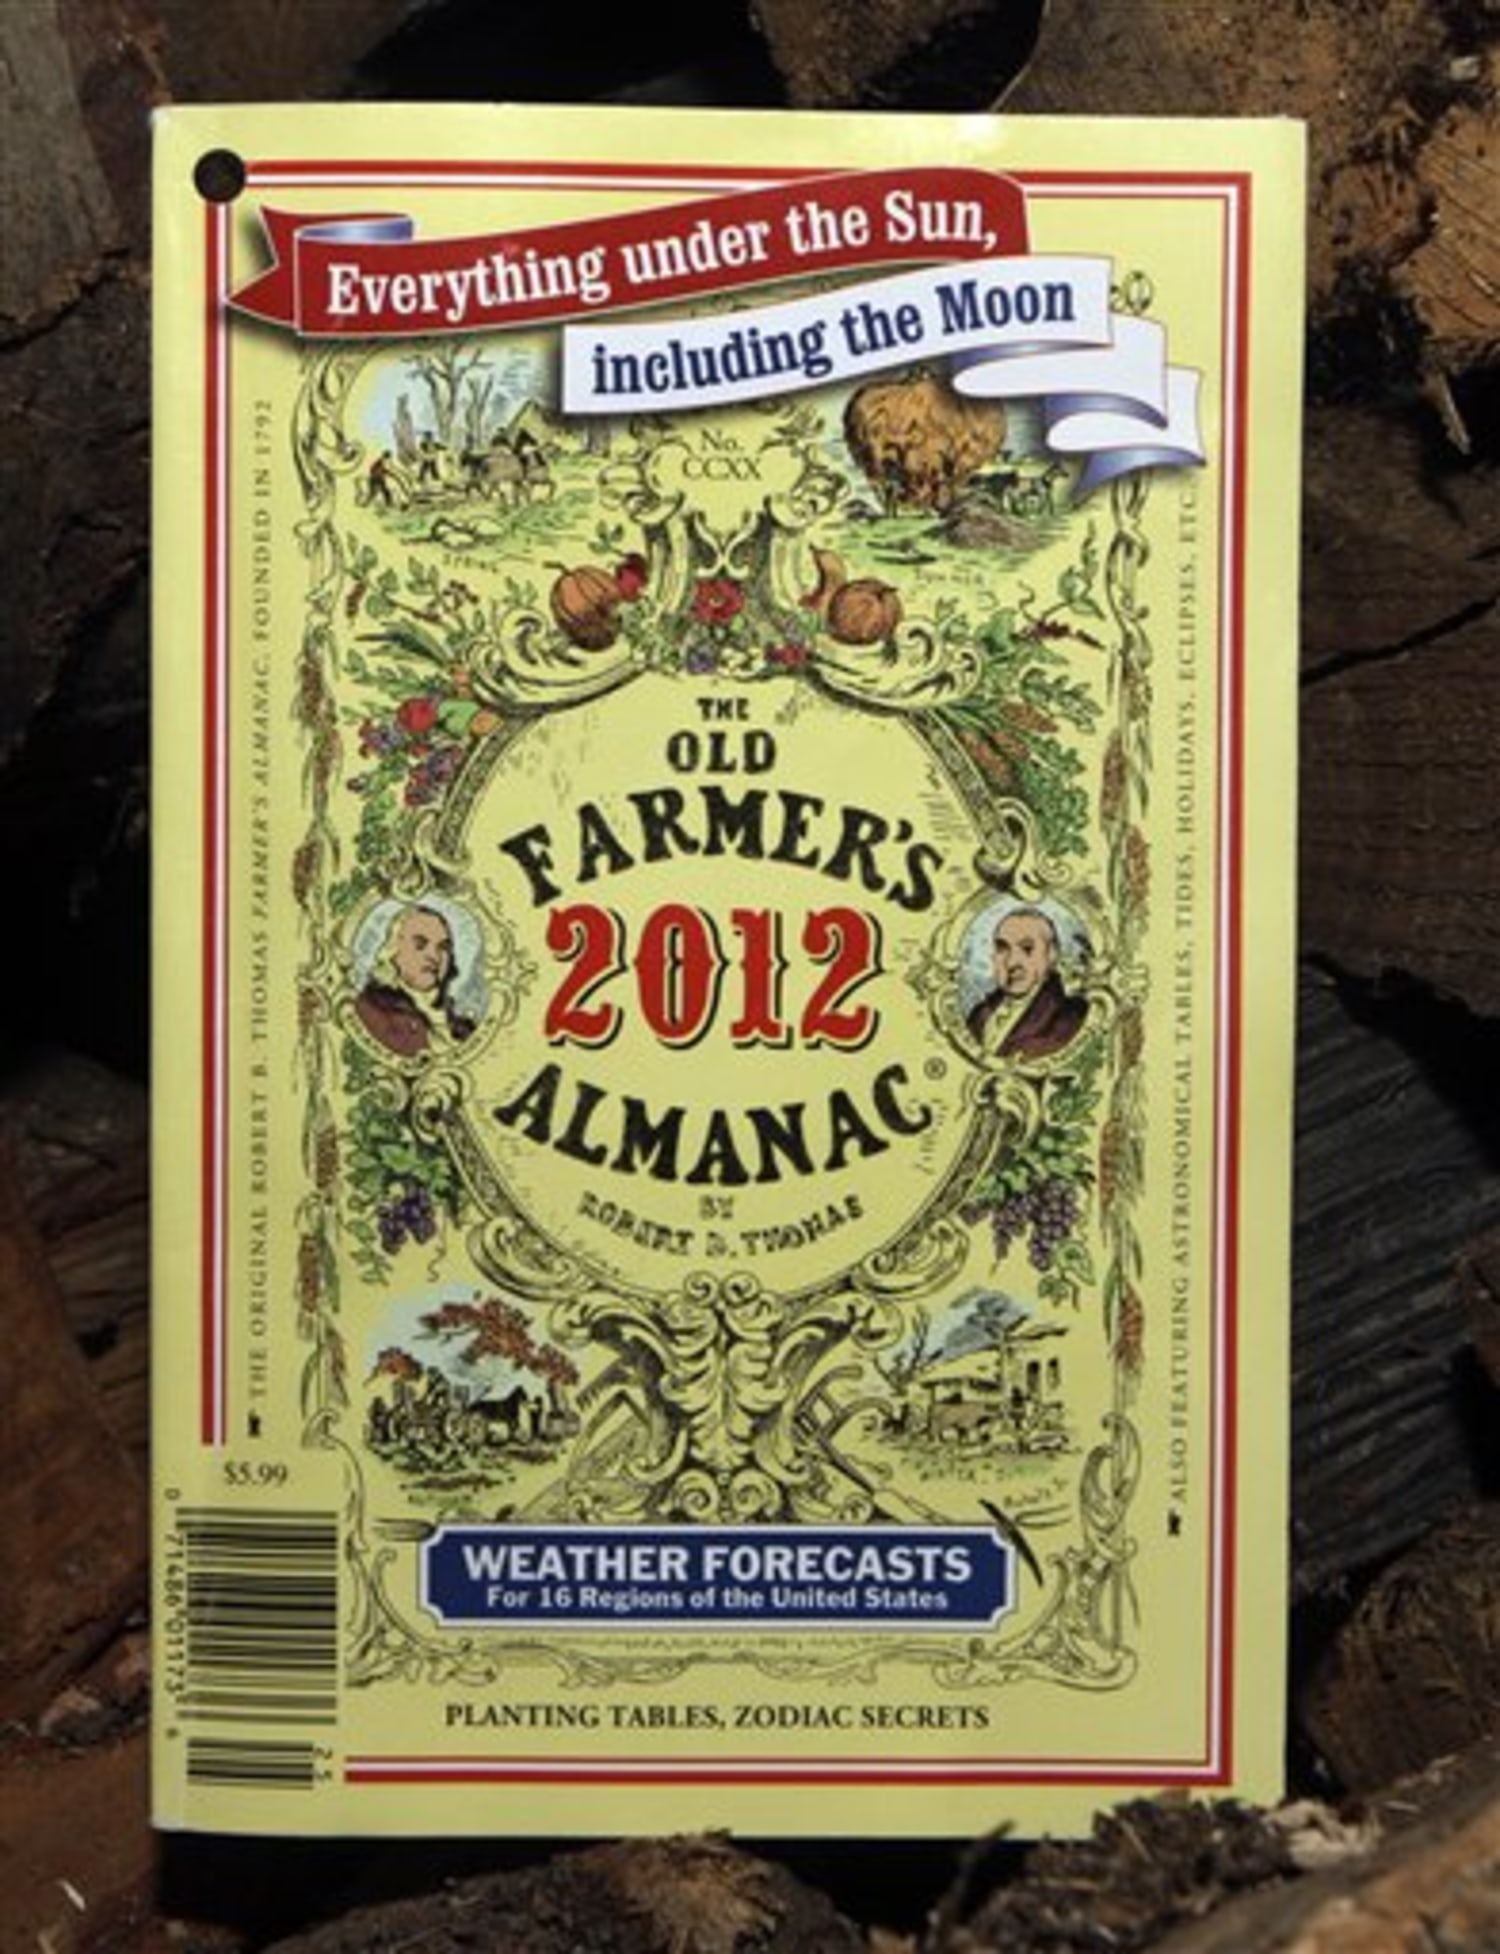 7 Genius Ways To Recycle Toilet Paper Tubes - Farmers' Almanac - Plan Your  Day. Grow Your Life.